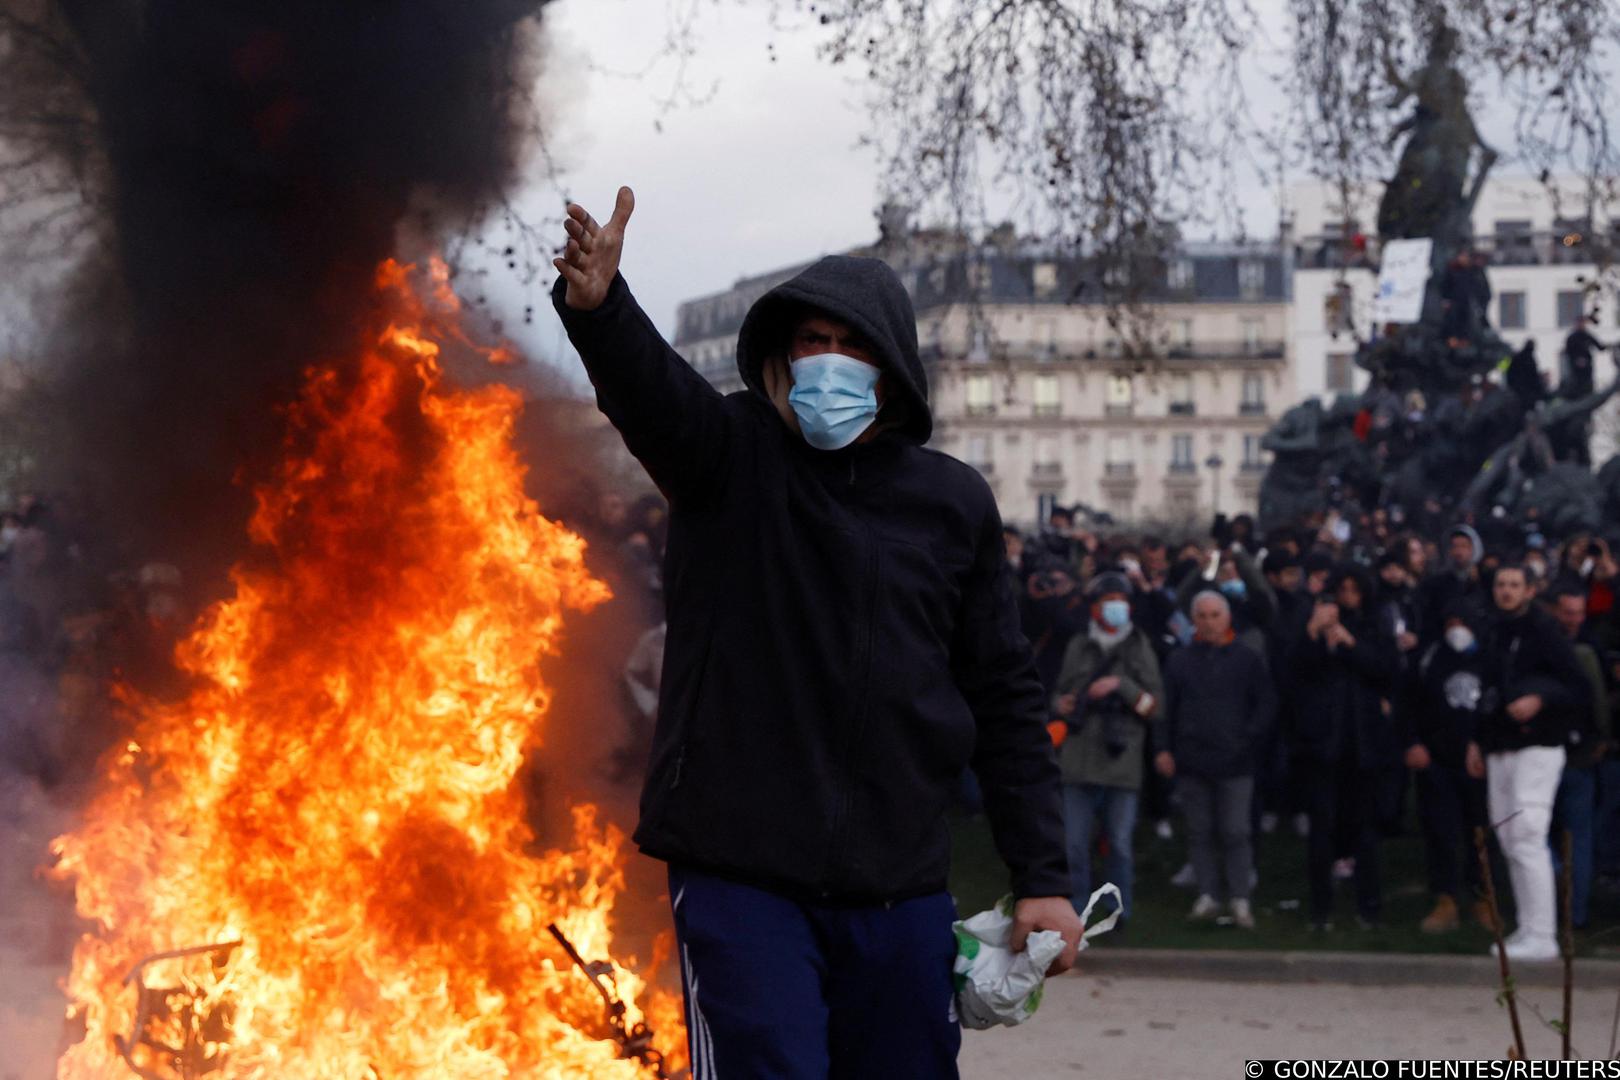 A masked protester reacts near a fire during clashes at a demonstration as part of the tenth day of nationwide strikes and protests against French government's pension reform, in Paris, France, March 28, 2023. REUTERS/Gonzalo Fuentes Photo: GONZALO FUENTES/REUTERS